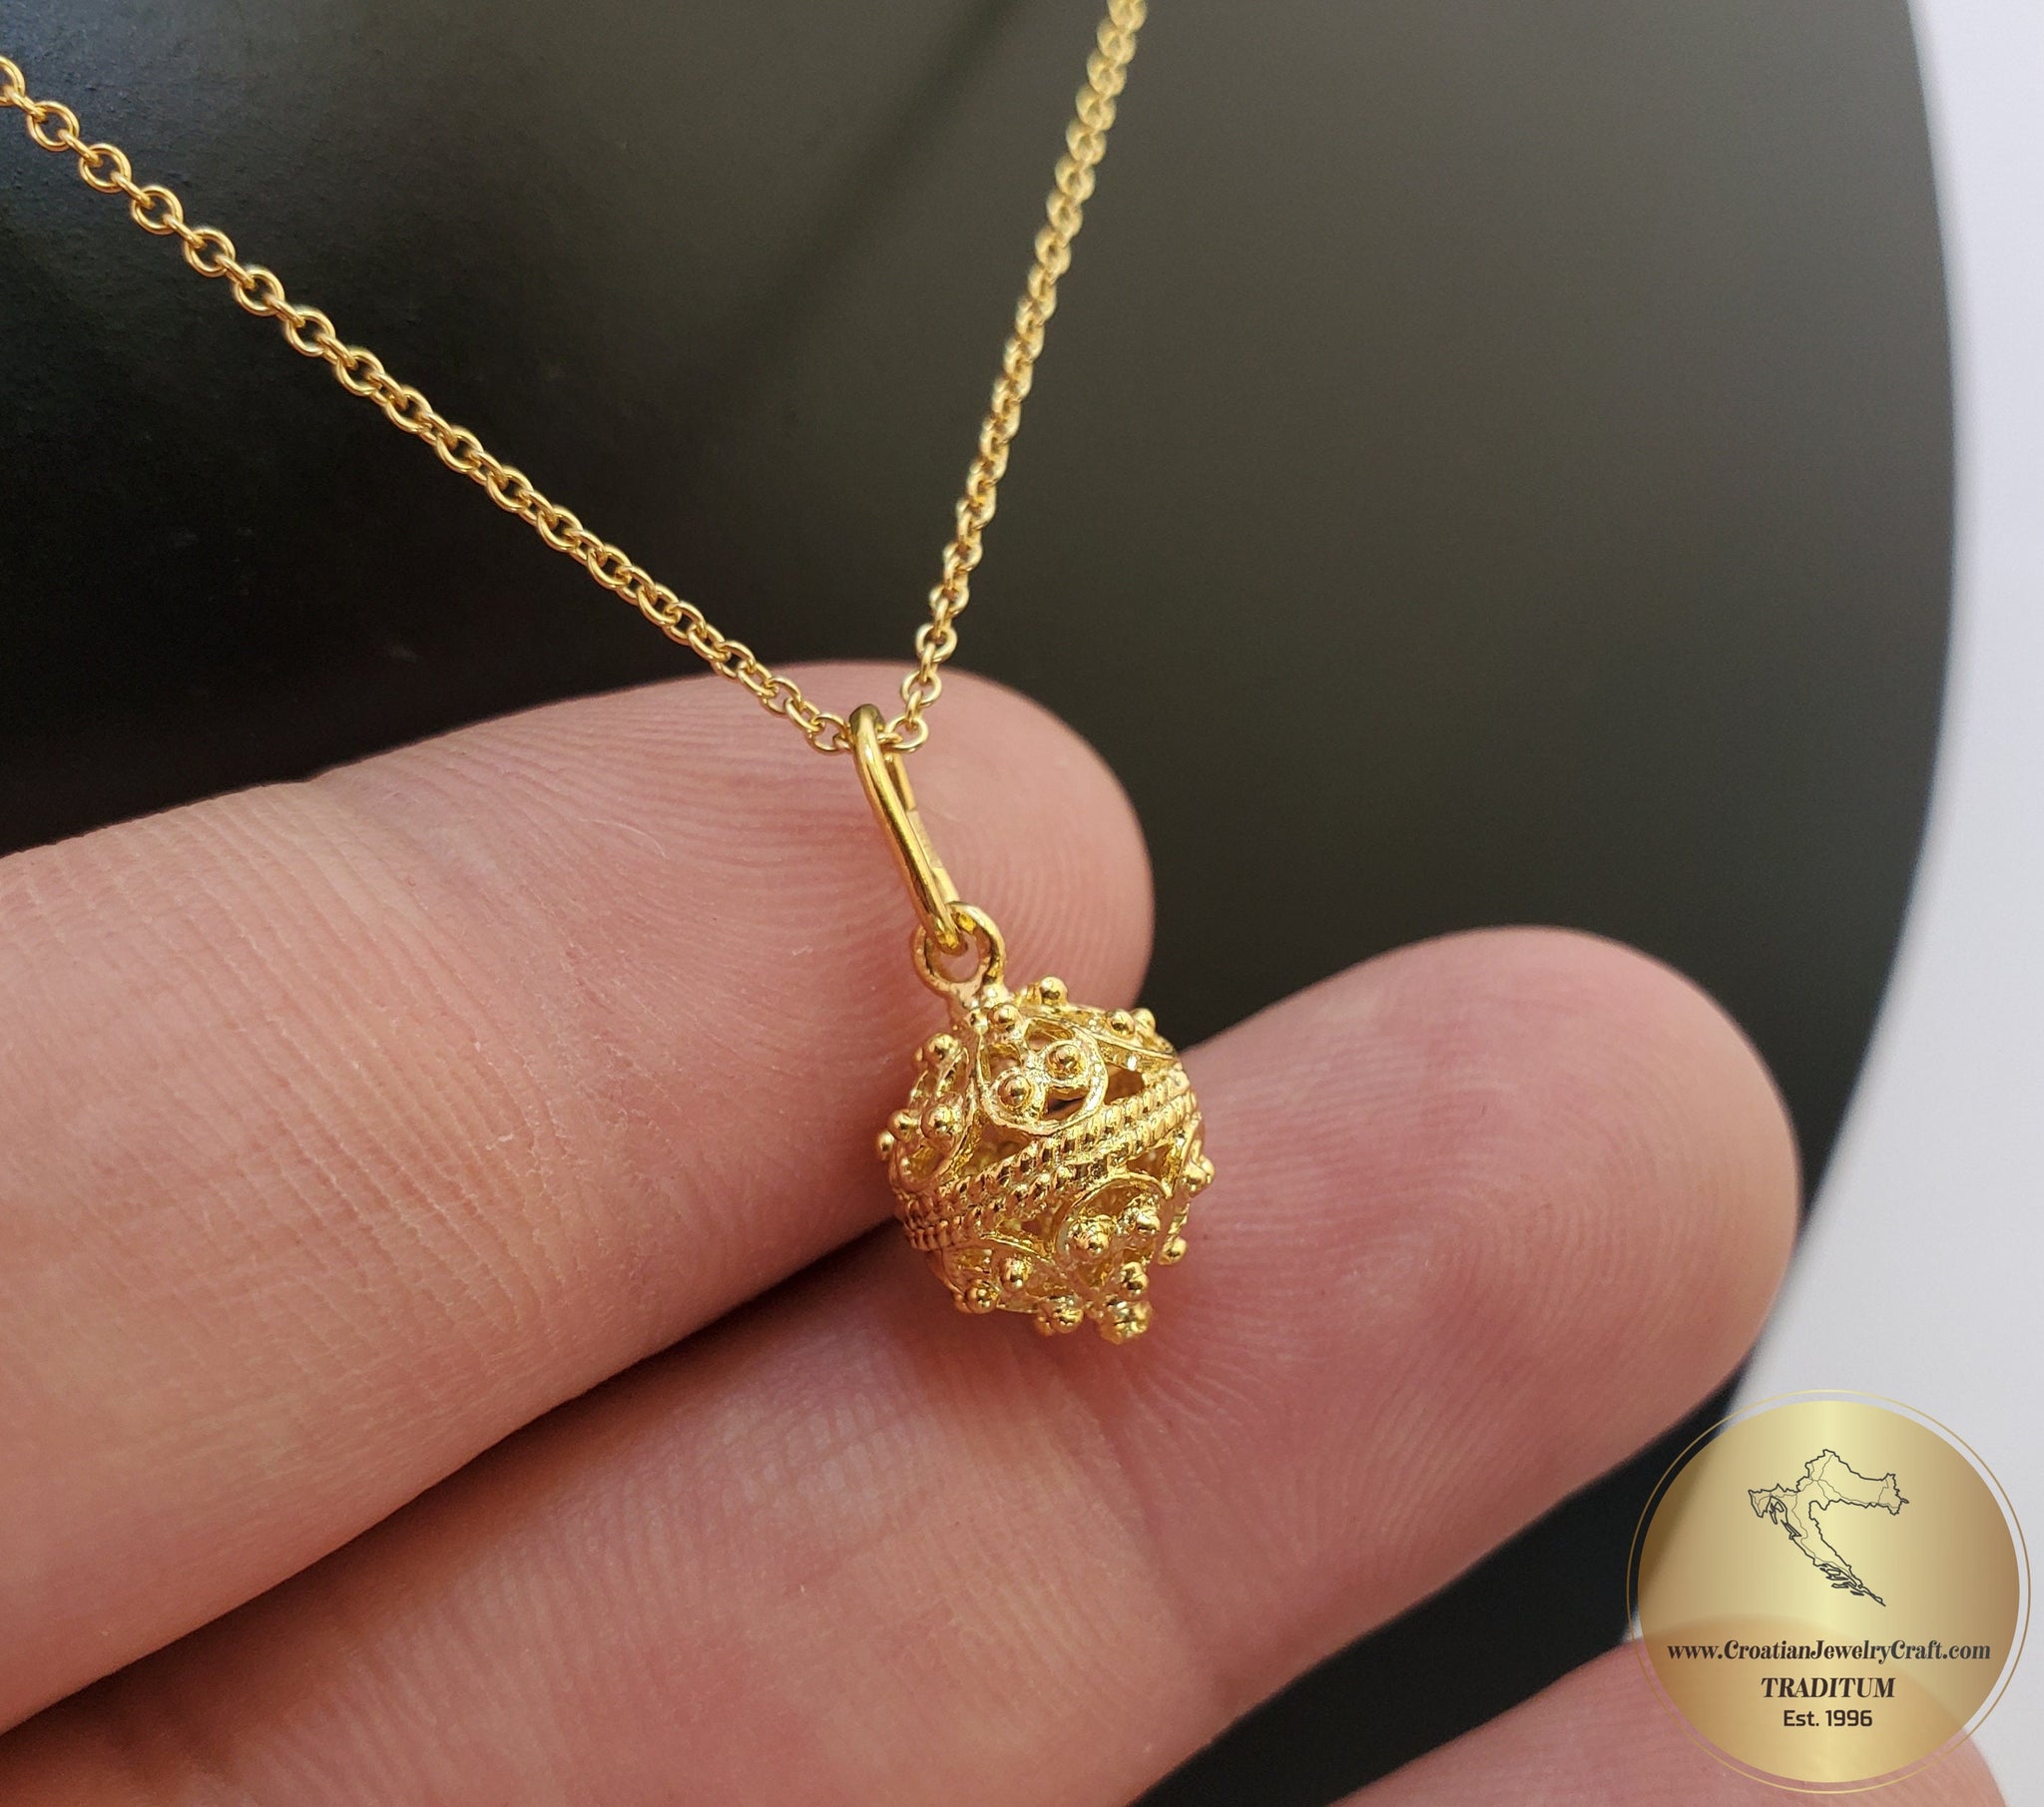 REAL 18K SOLID Saudi Gold Necklace With Pendant $1,250.00 - PicClick